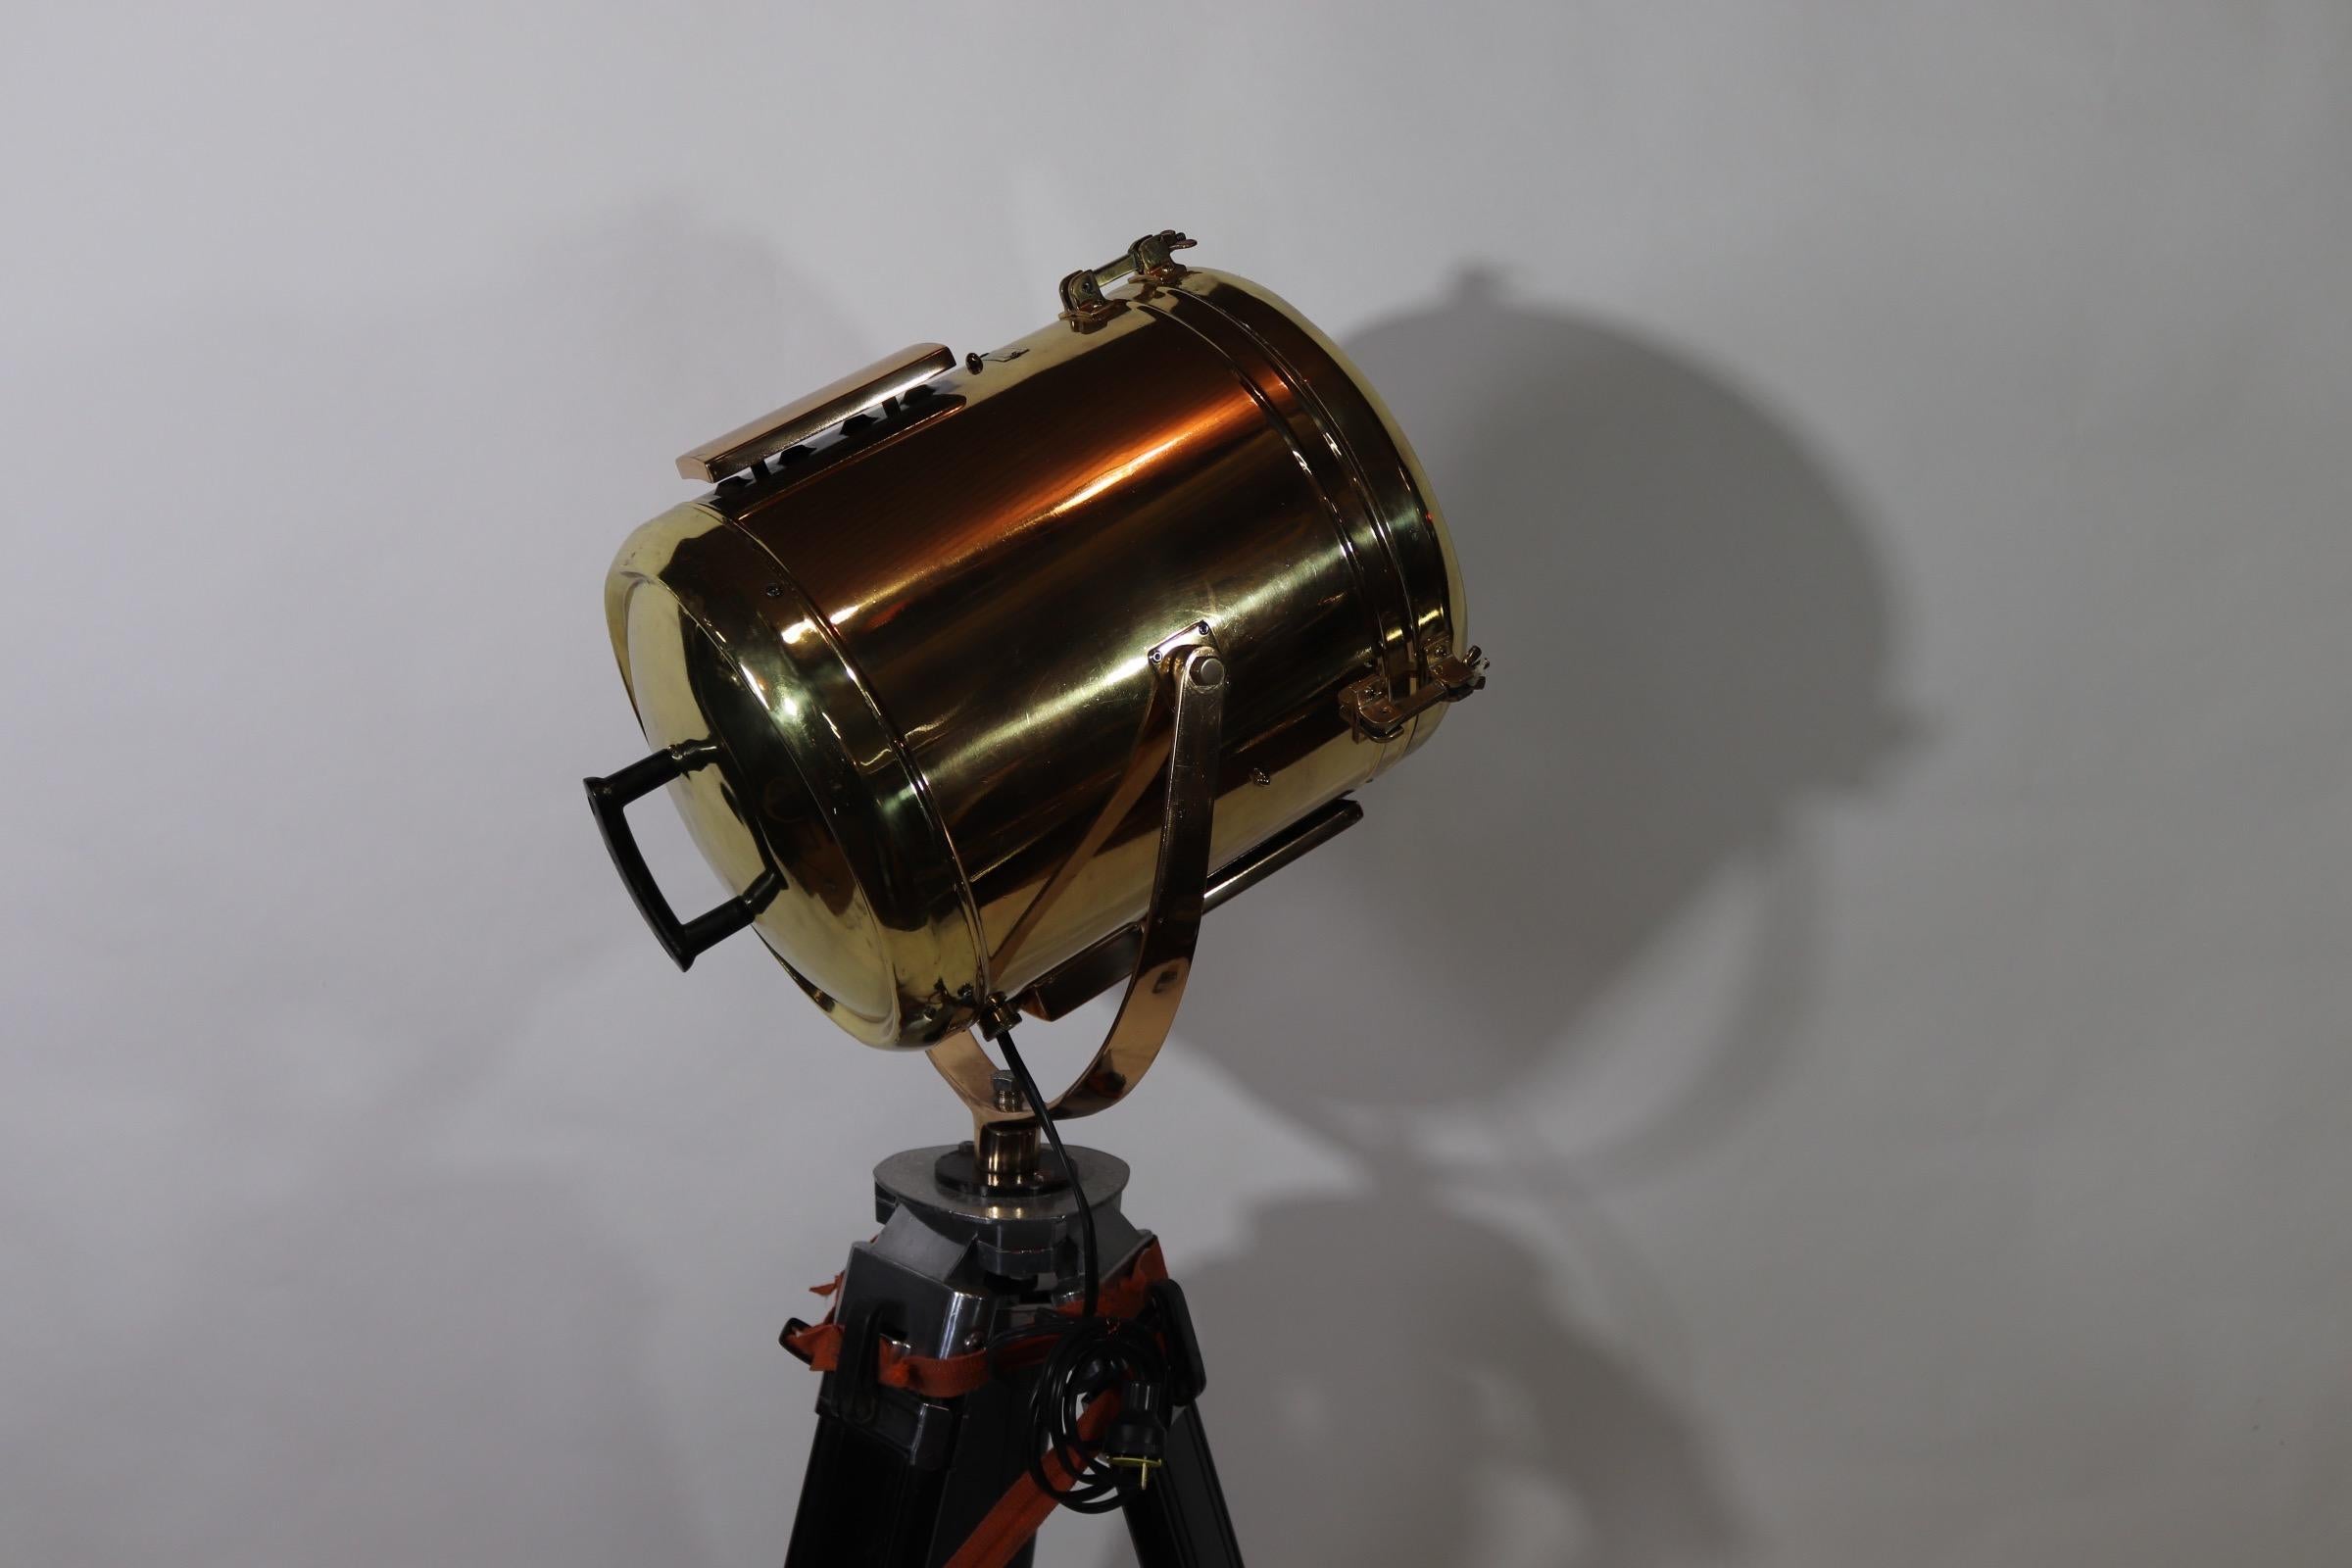 Highly polished and lacquered brass maritime beacon by Perko of Brooklyn, New York. We have fitted this beacon to a vintage tripod that we polished the fittings on and painted black. Rewired with new socket, circa 1980. Weight is 35 pounds.